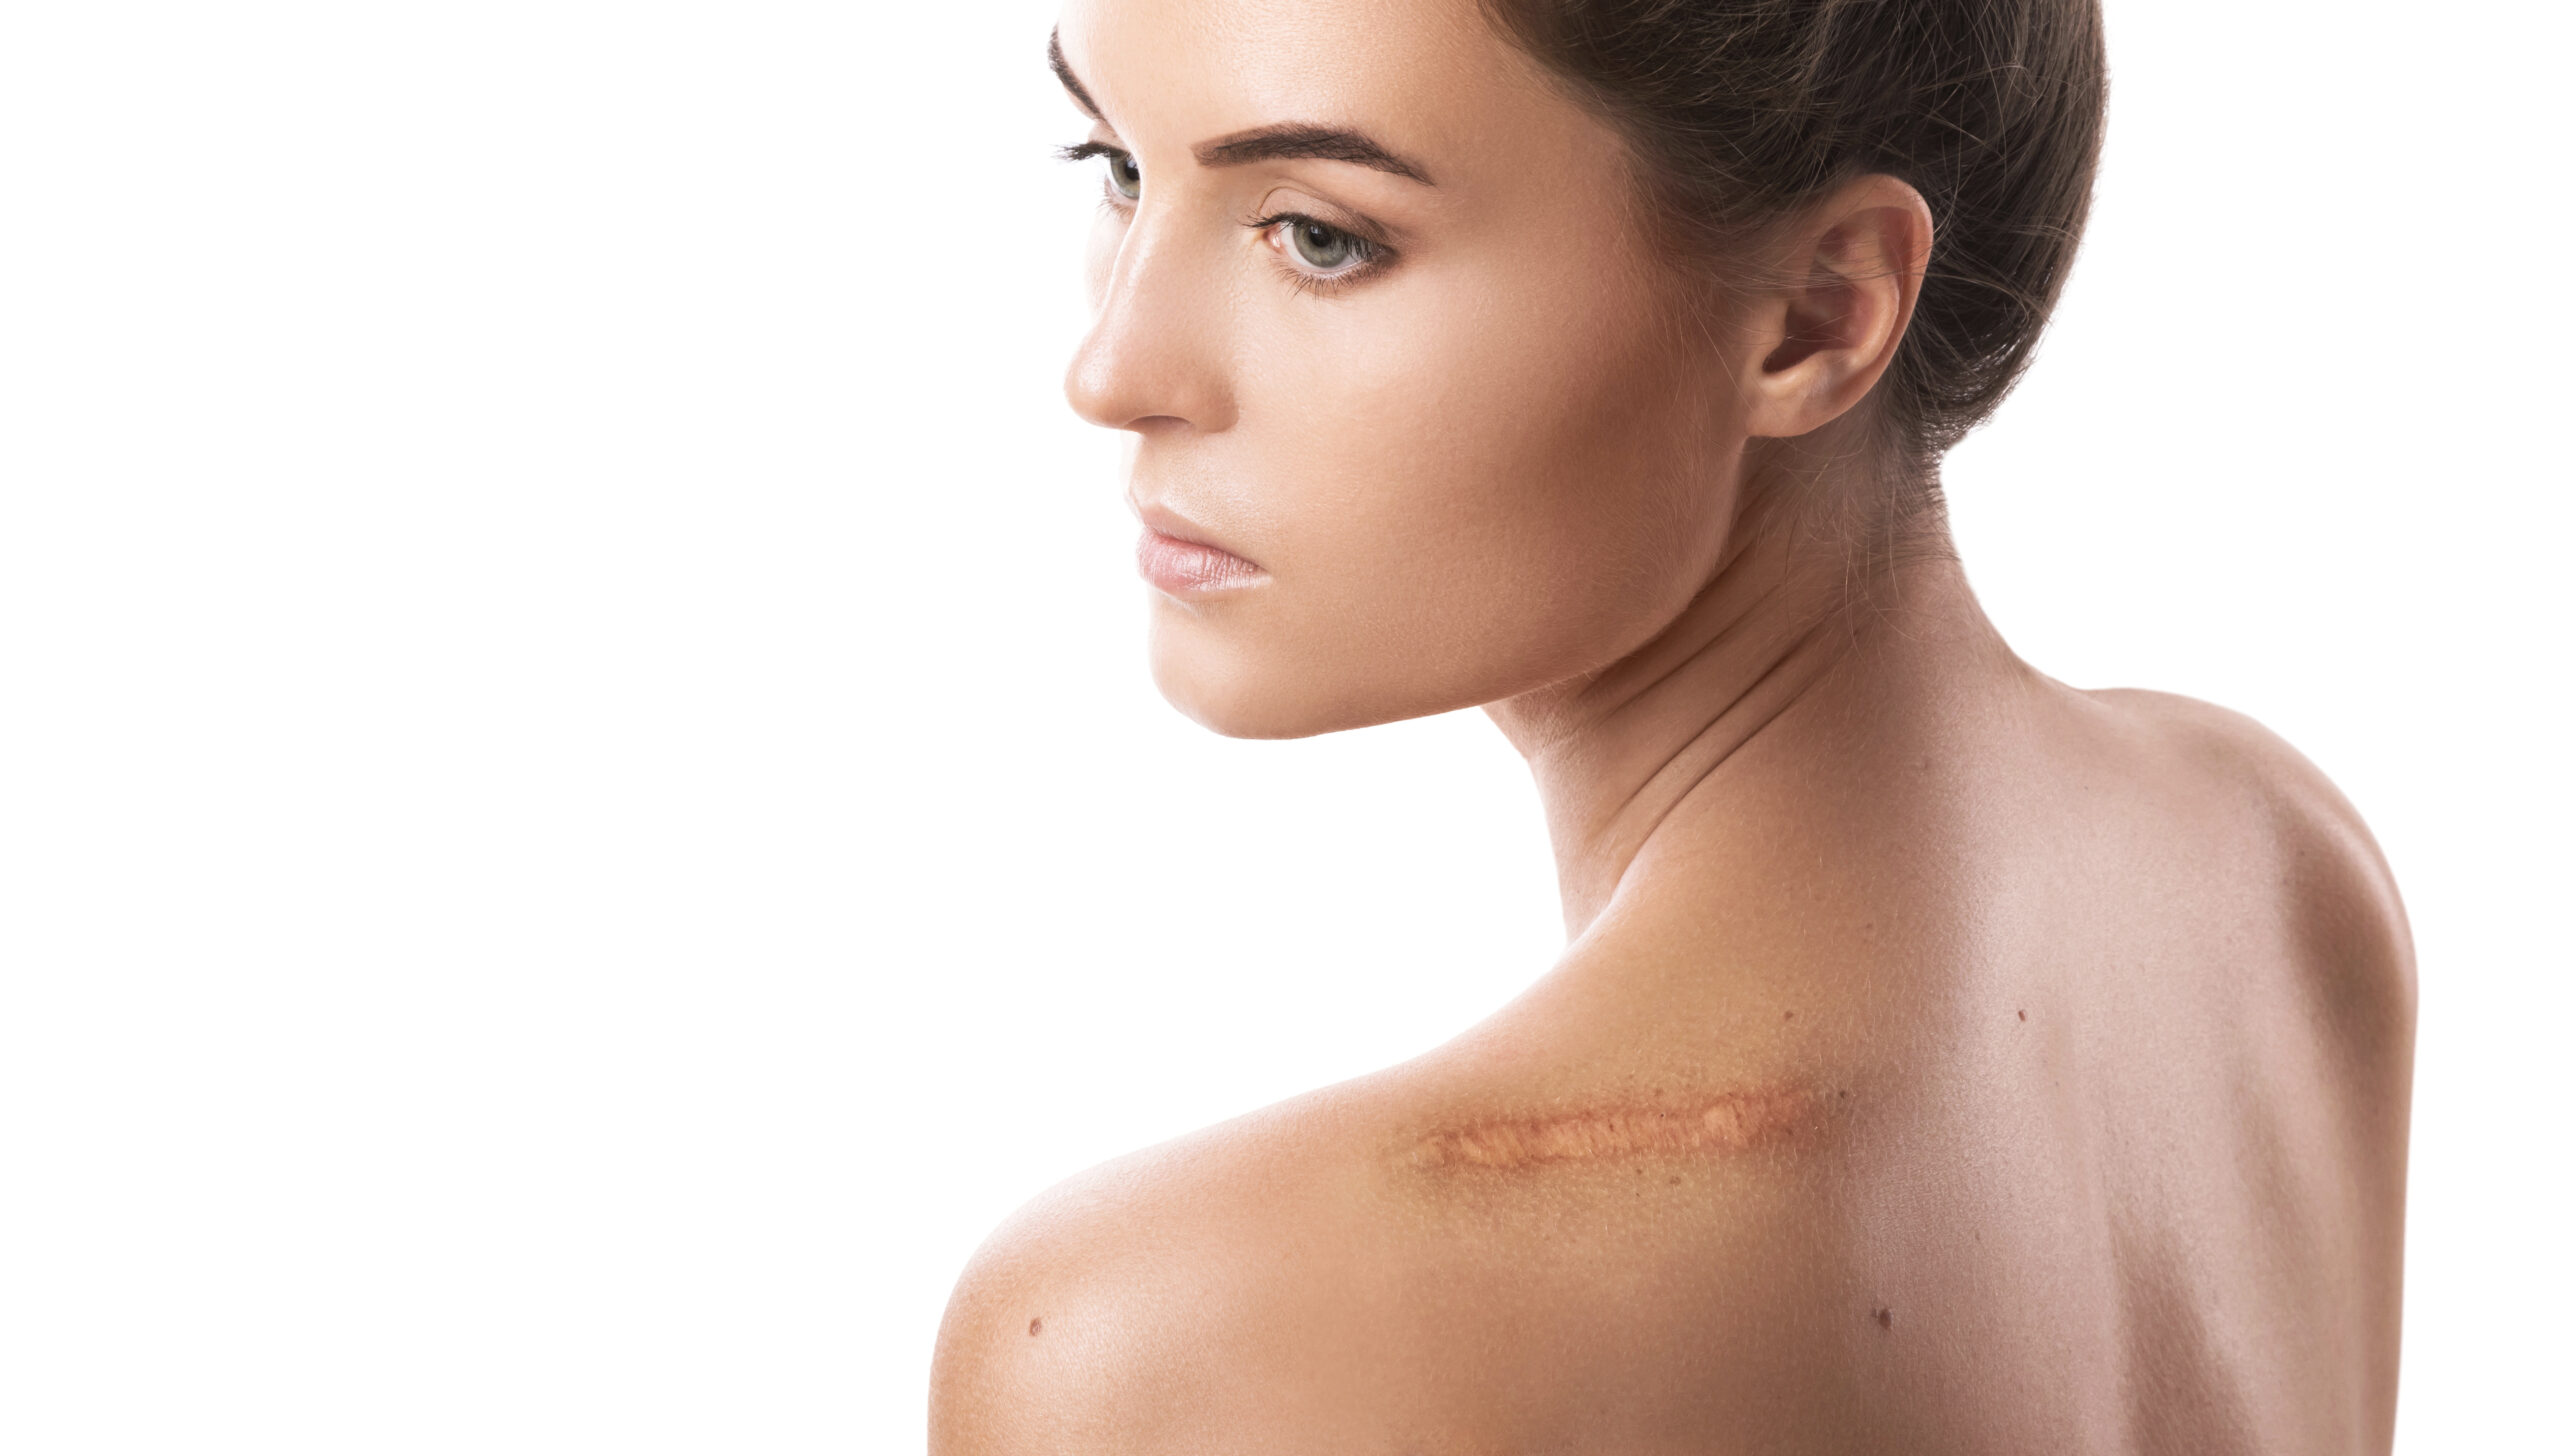 All About Scarring: What Can Help?